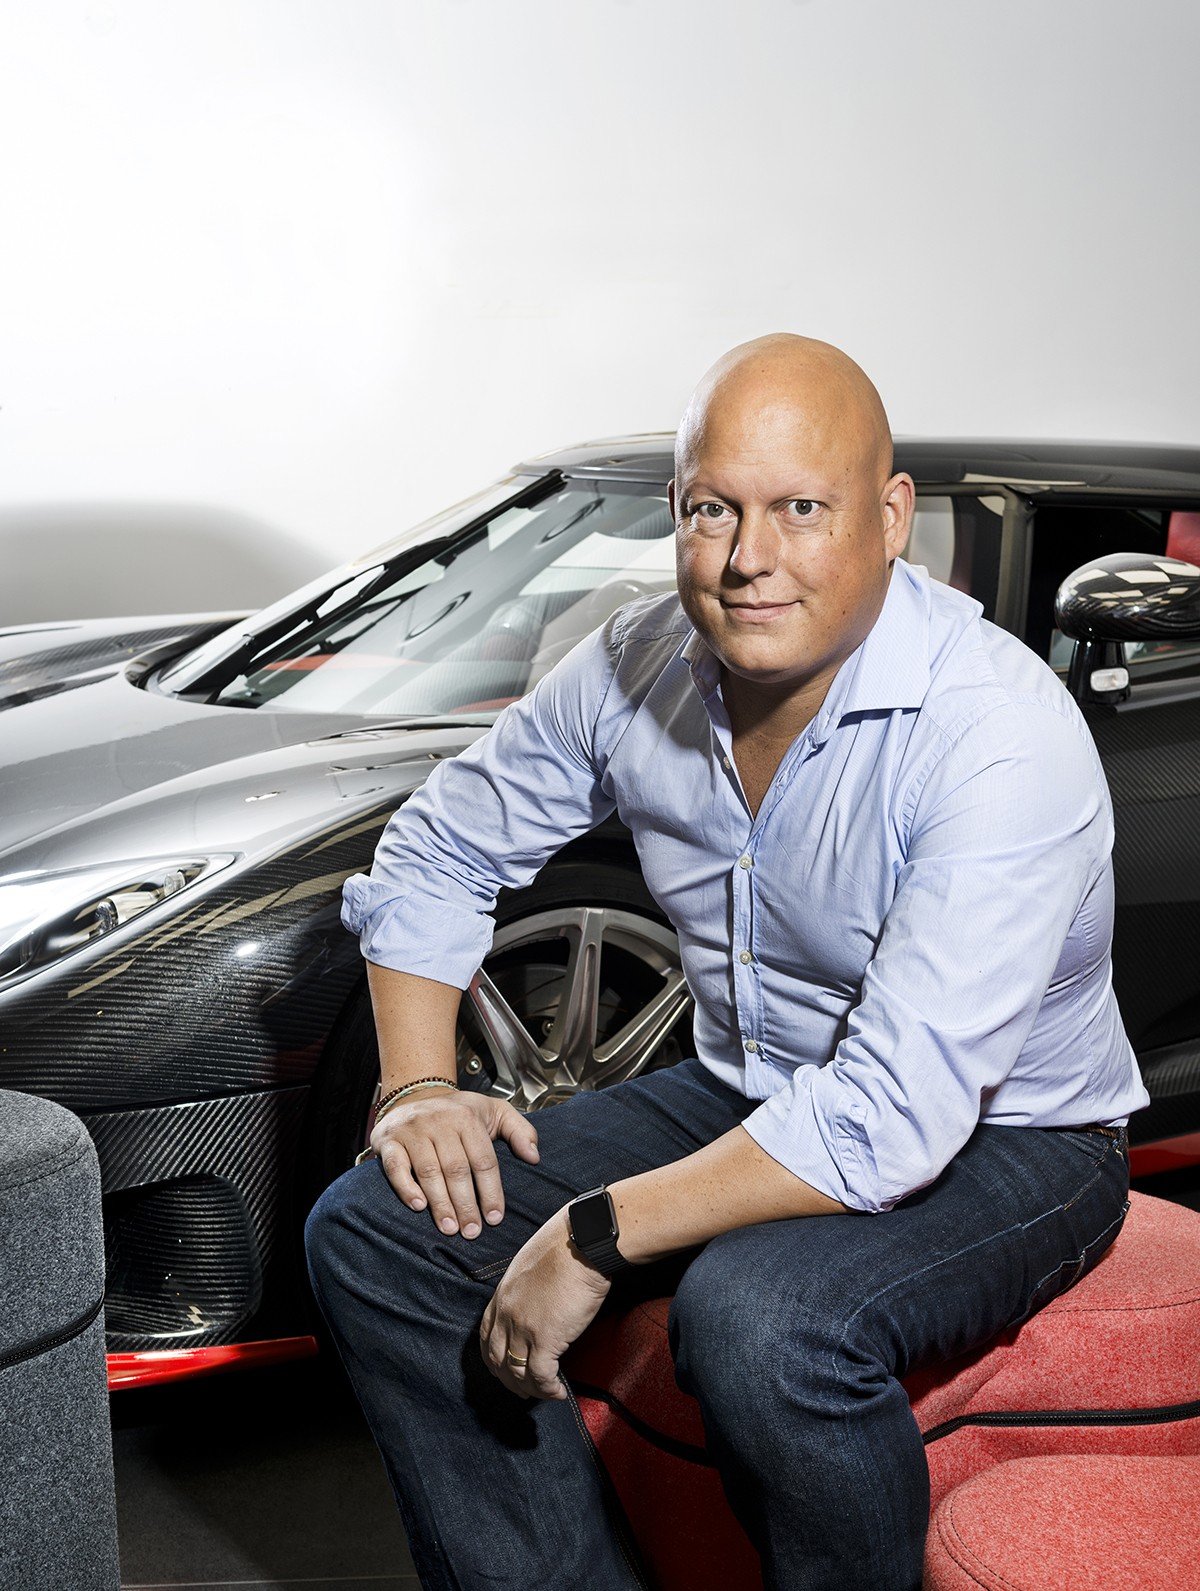 Christian von Koenigsegg, the CEO of Koenigsegg Automotive, is behind the Jesko, a hypercar that he says can reach 480kph. He is in Hong Kong to unveil the car and says he is excited about the Asian market as it has an established, vibrant car culture. Photo: Anders Sällström